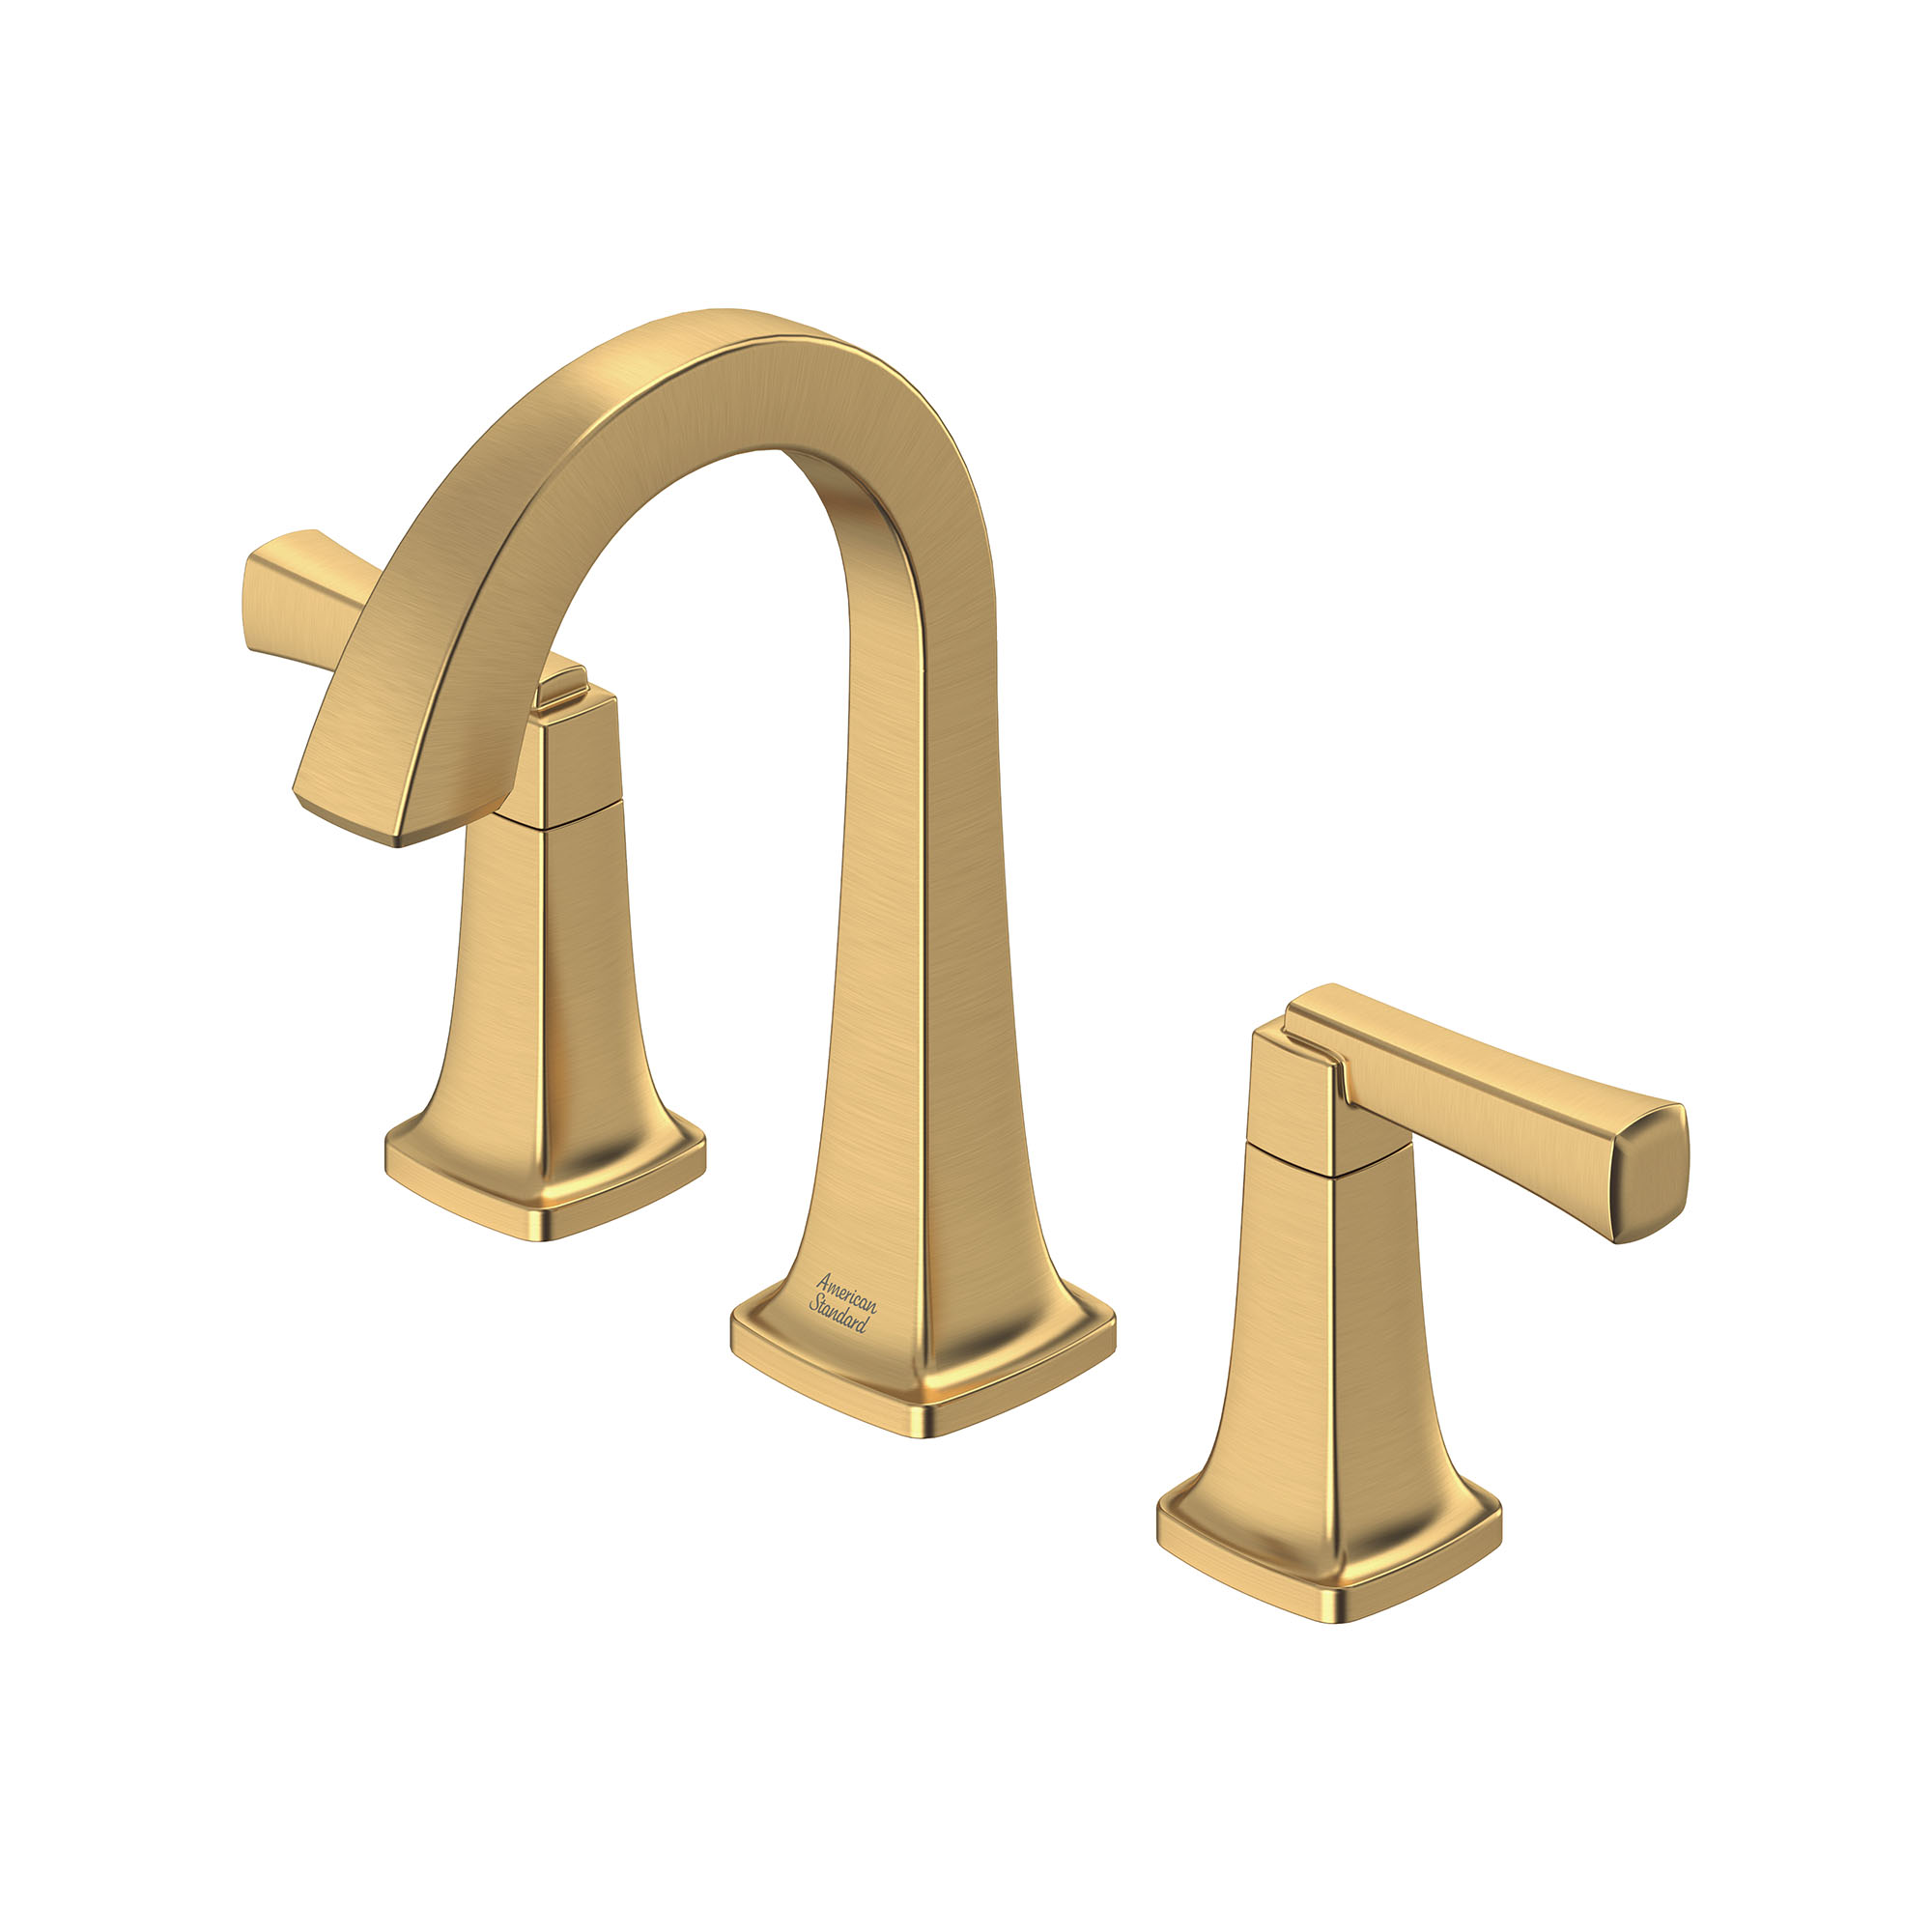 Townsend™ 8-Inch Widespread 2-Handle Bathroom Faucet 1.2 gpm/4.5 L/min With Lever Handles